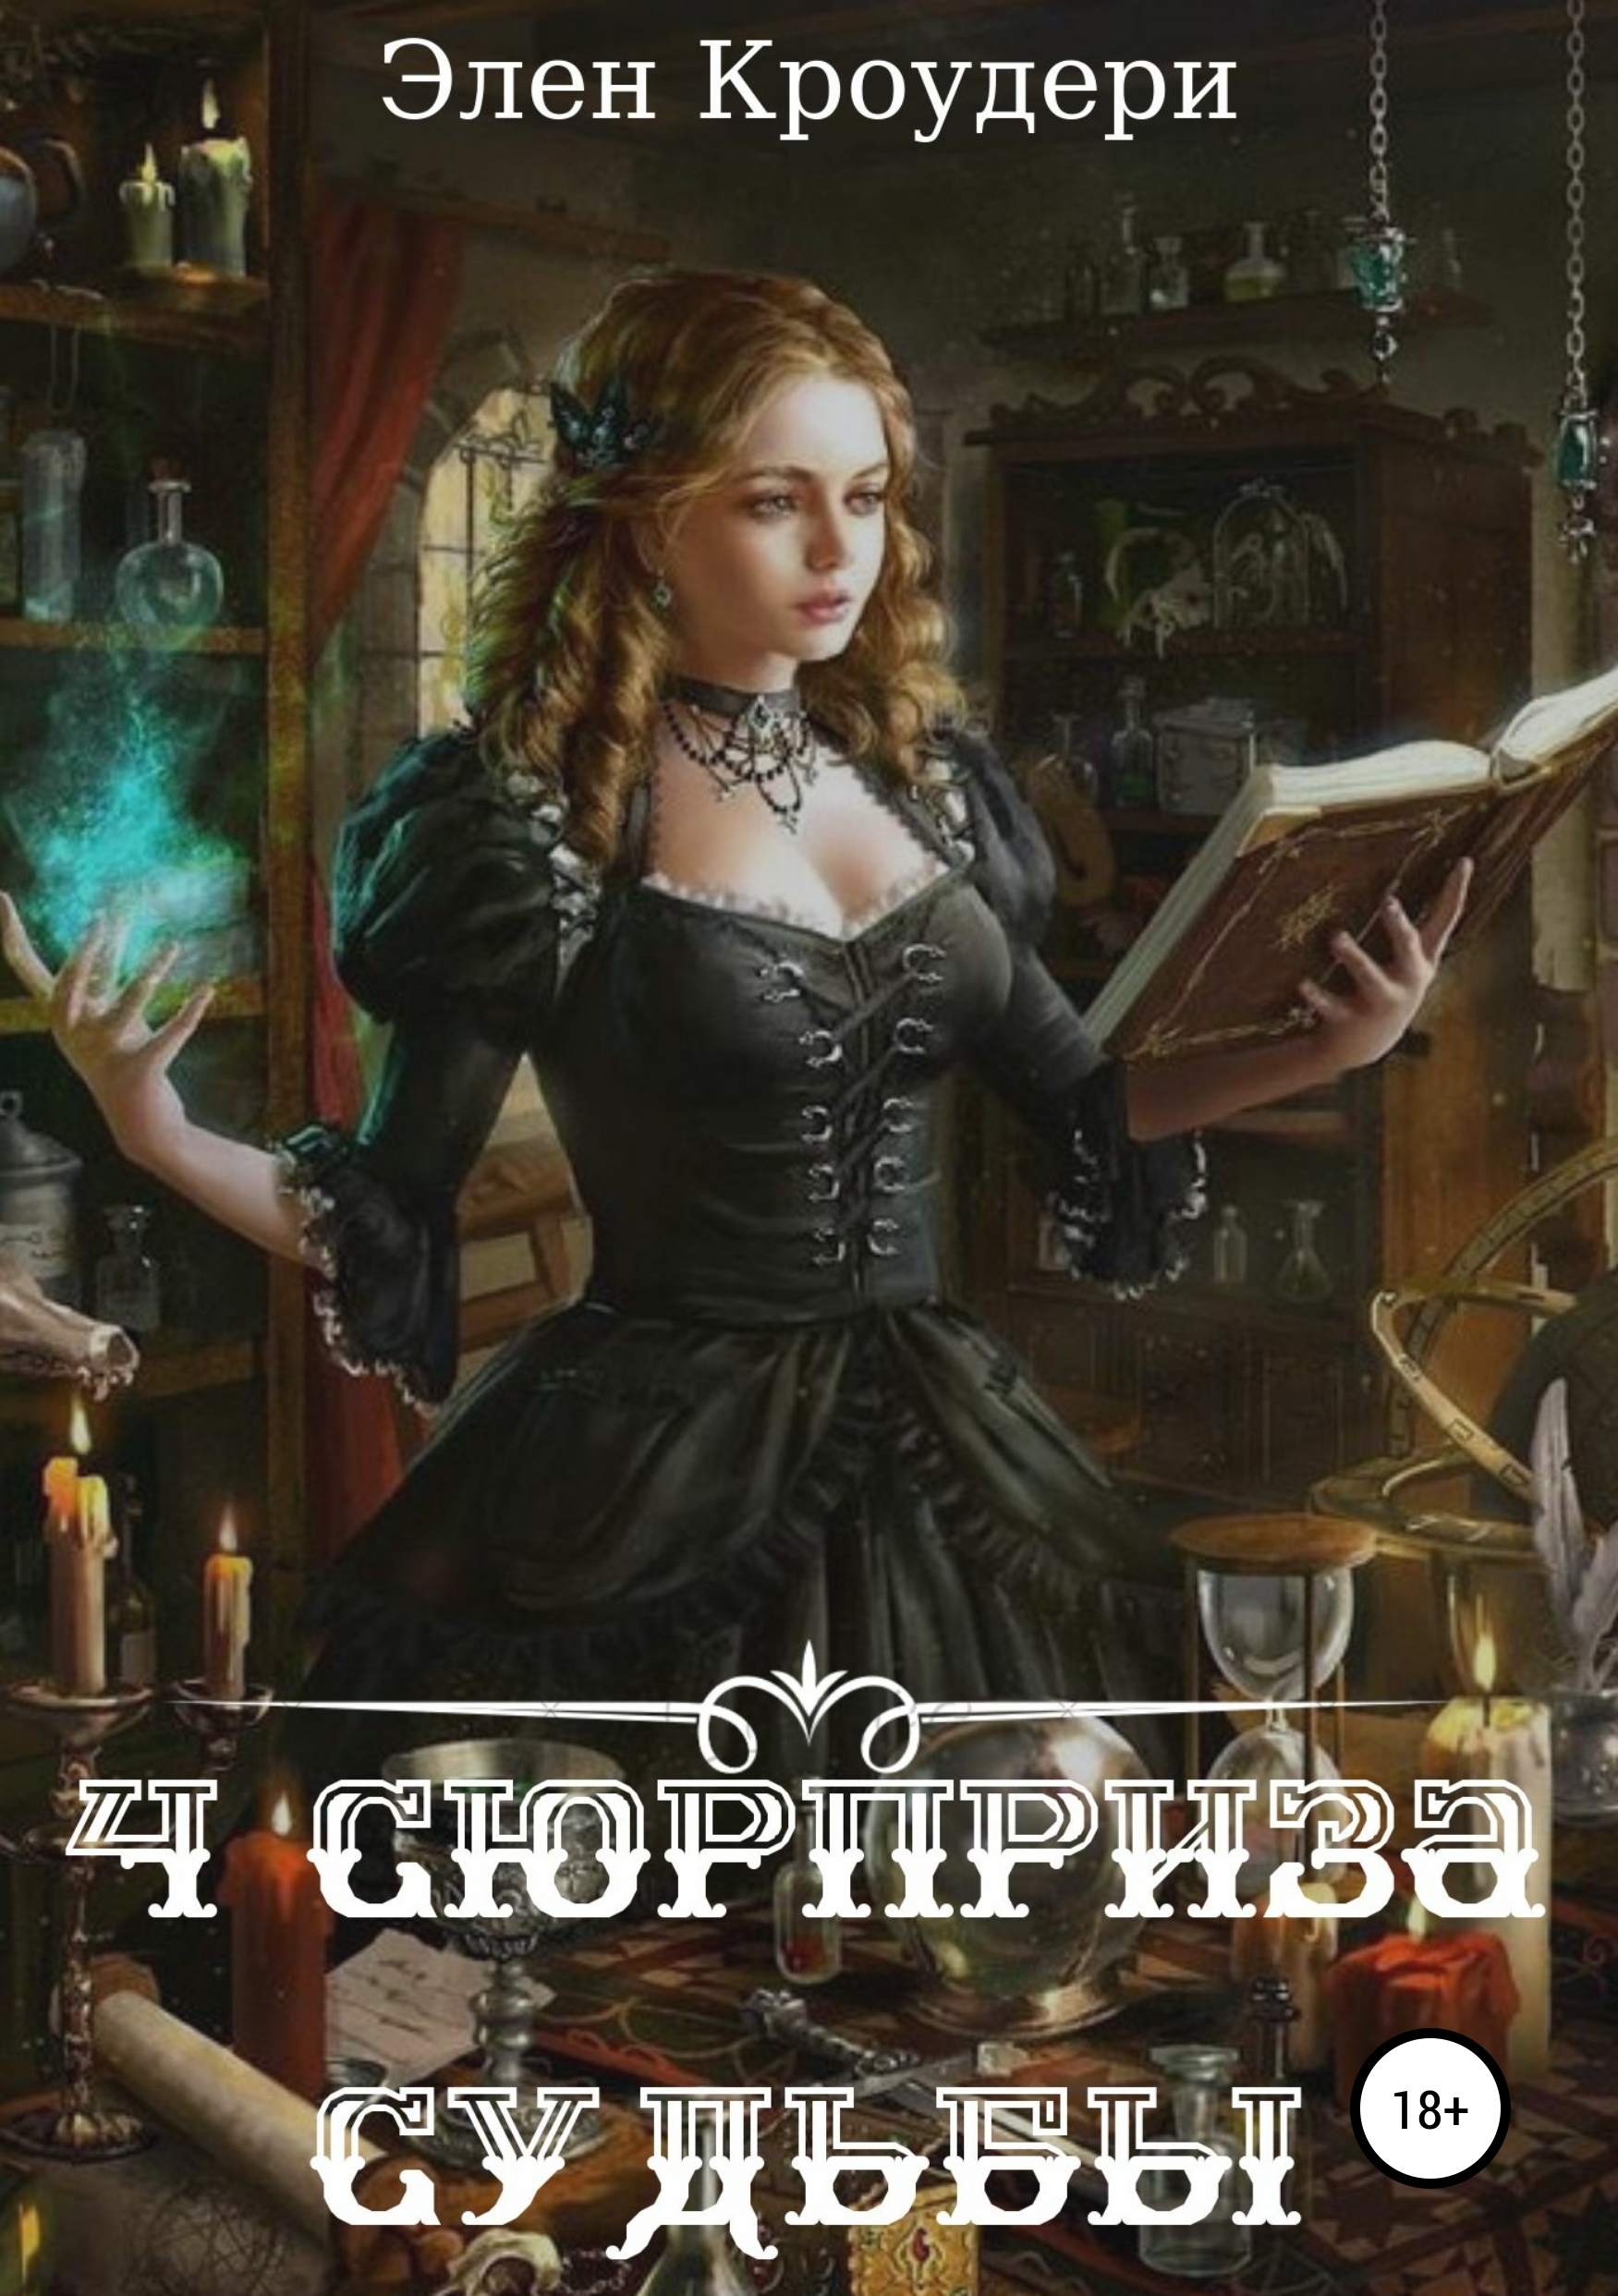 Legend of the cryptids ведьма